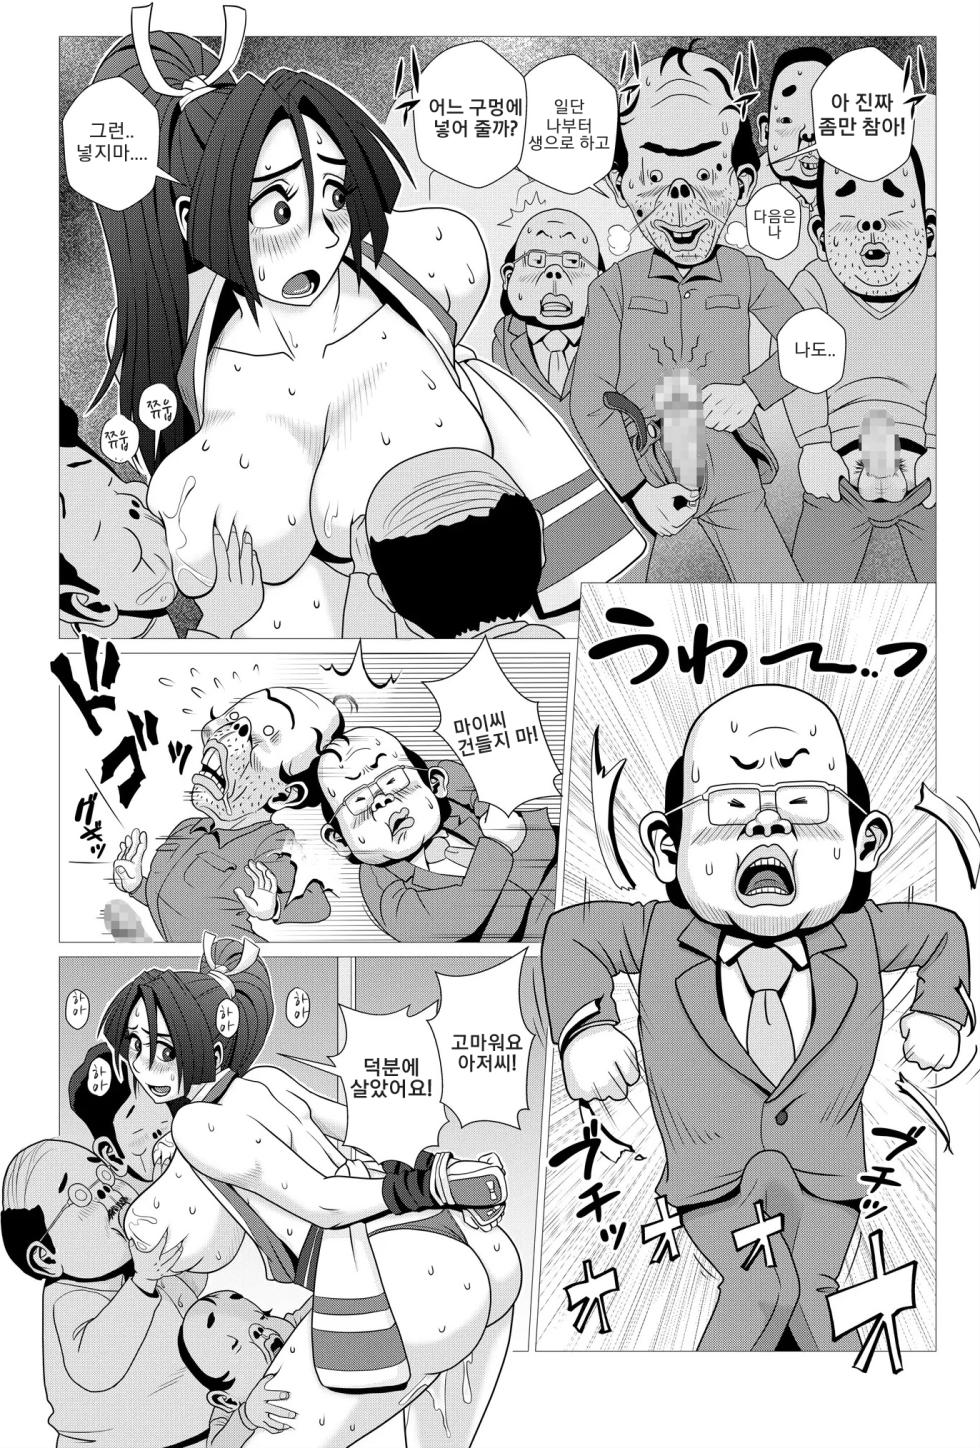 [Falcon115 (Forester)] Maidono no San (The King of Fighters) [Korean] - Page 15